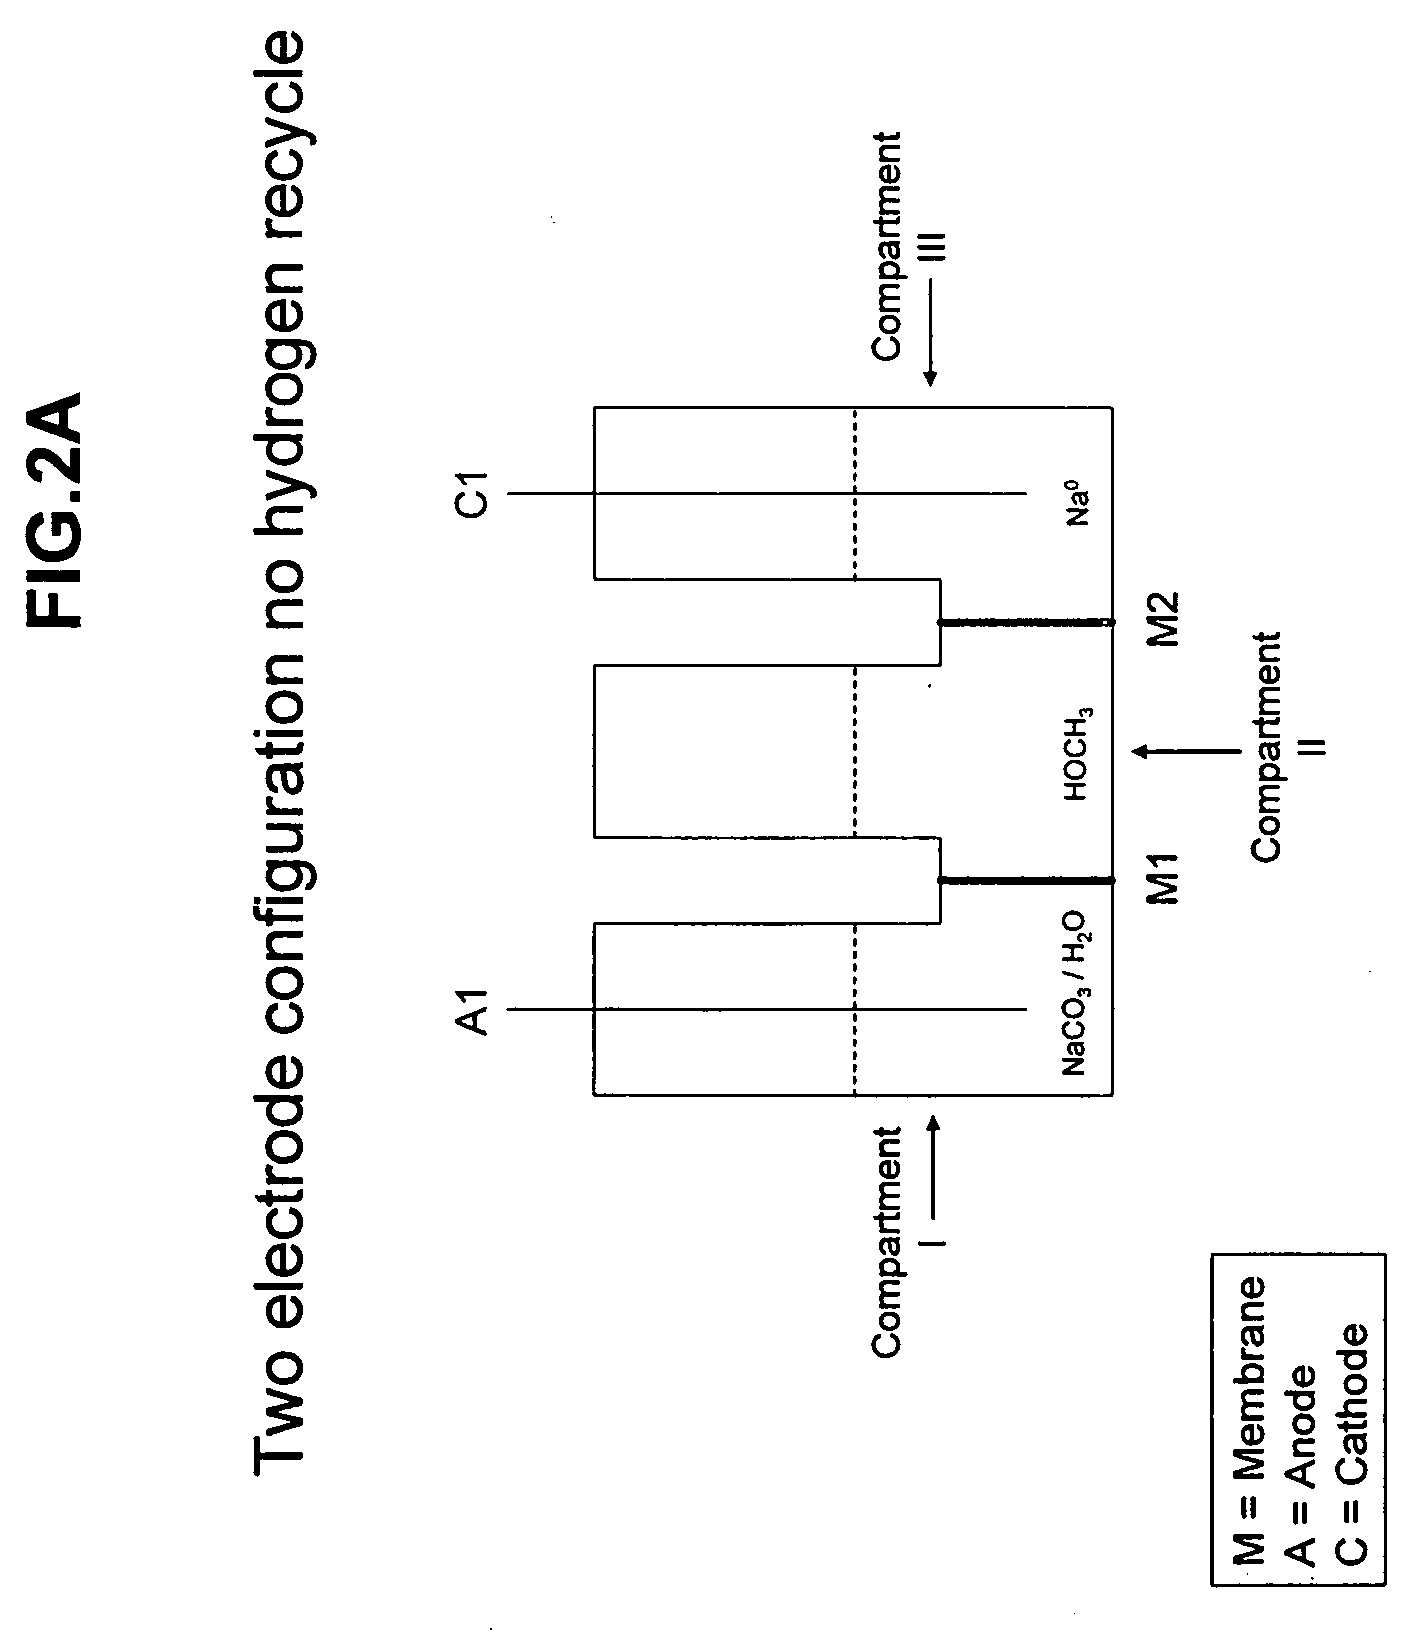 Processes and reactors for alkali metal production